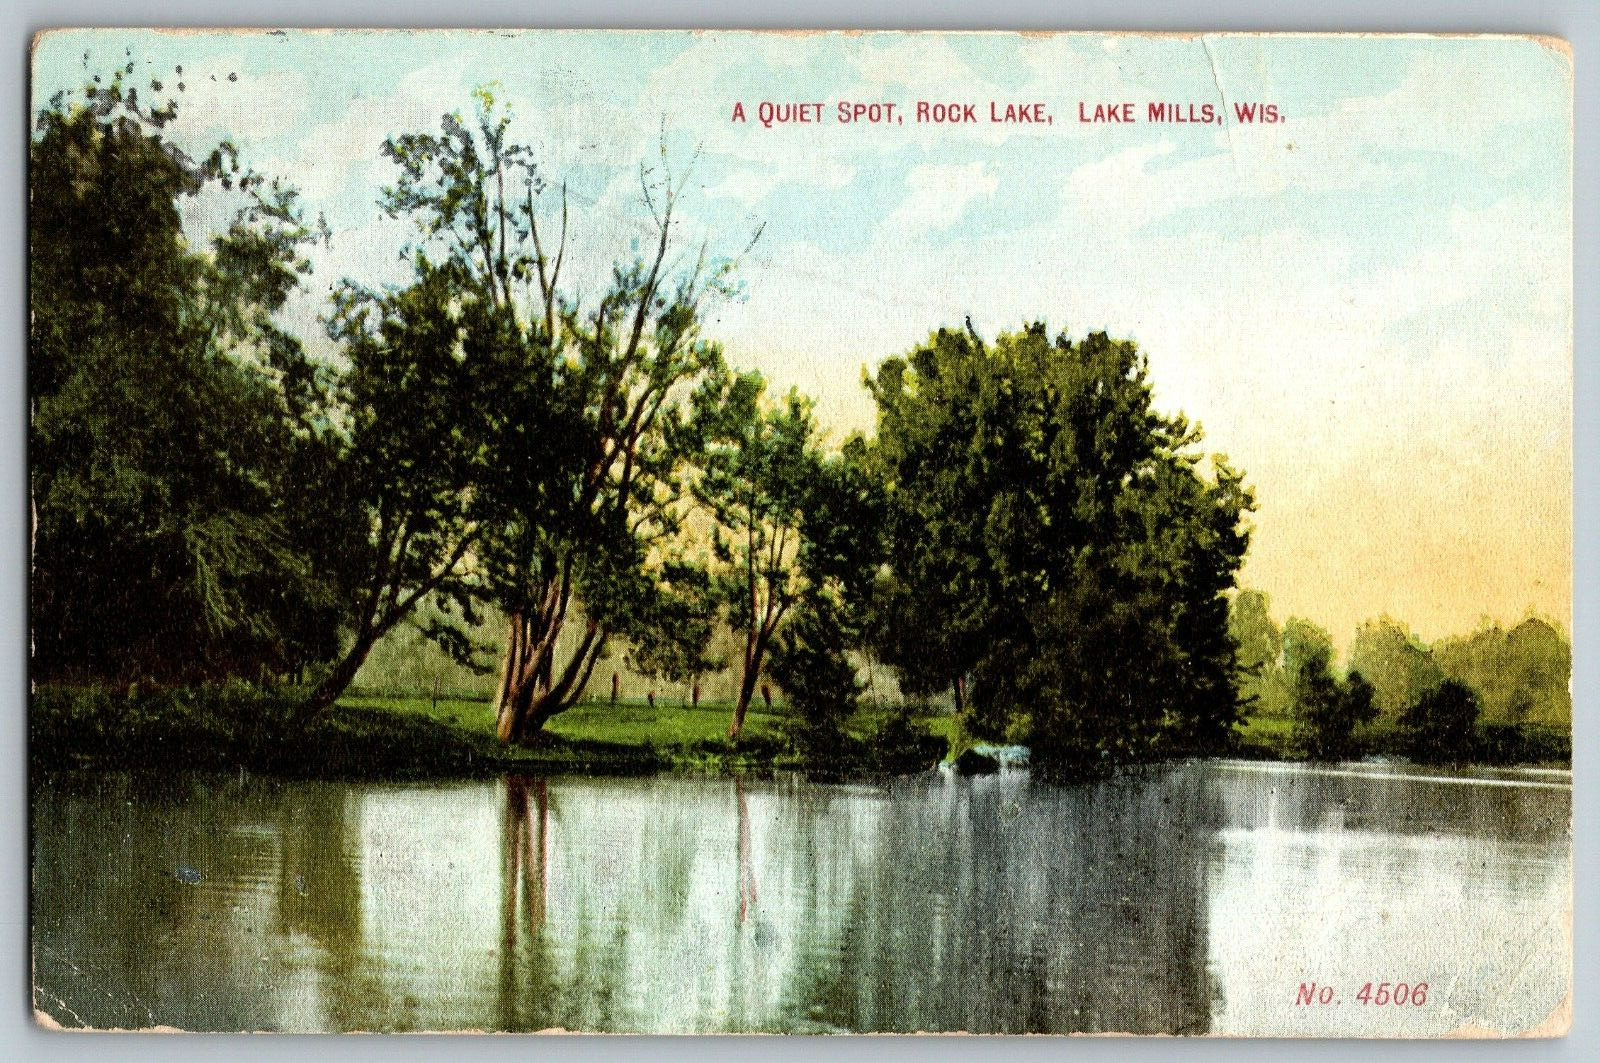 Lake Mills, Wisconsin - A Quiet Spot, Rock Lake - Vintage Postcard - Posted